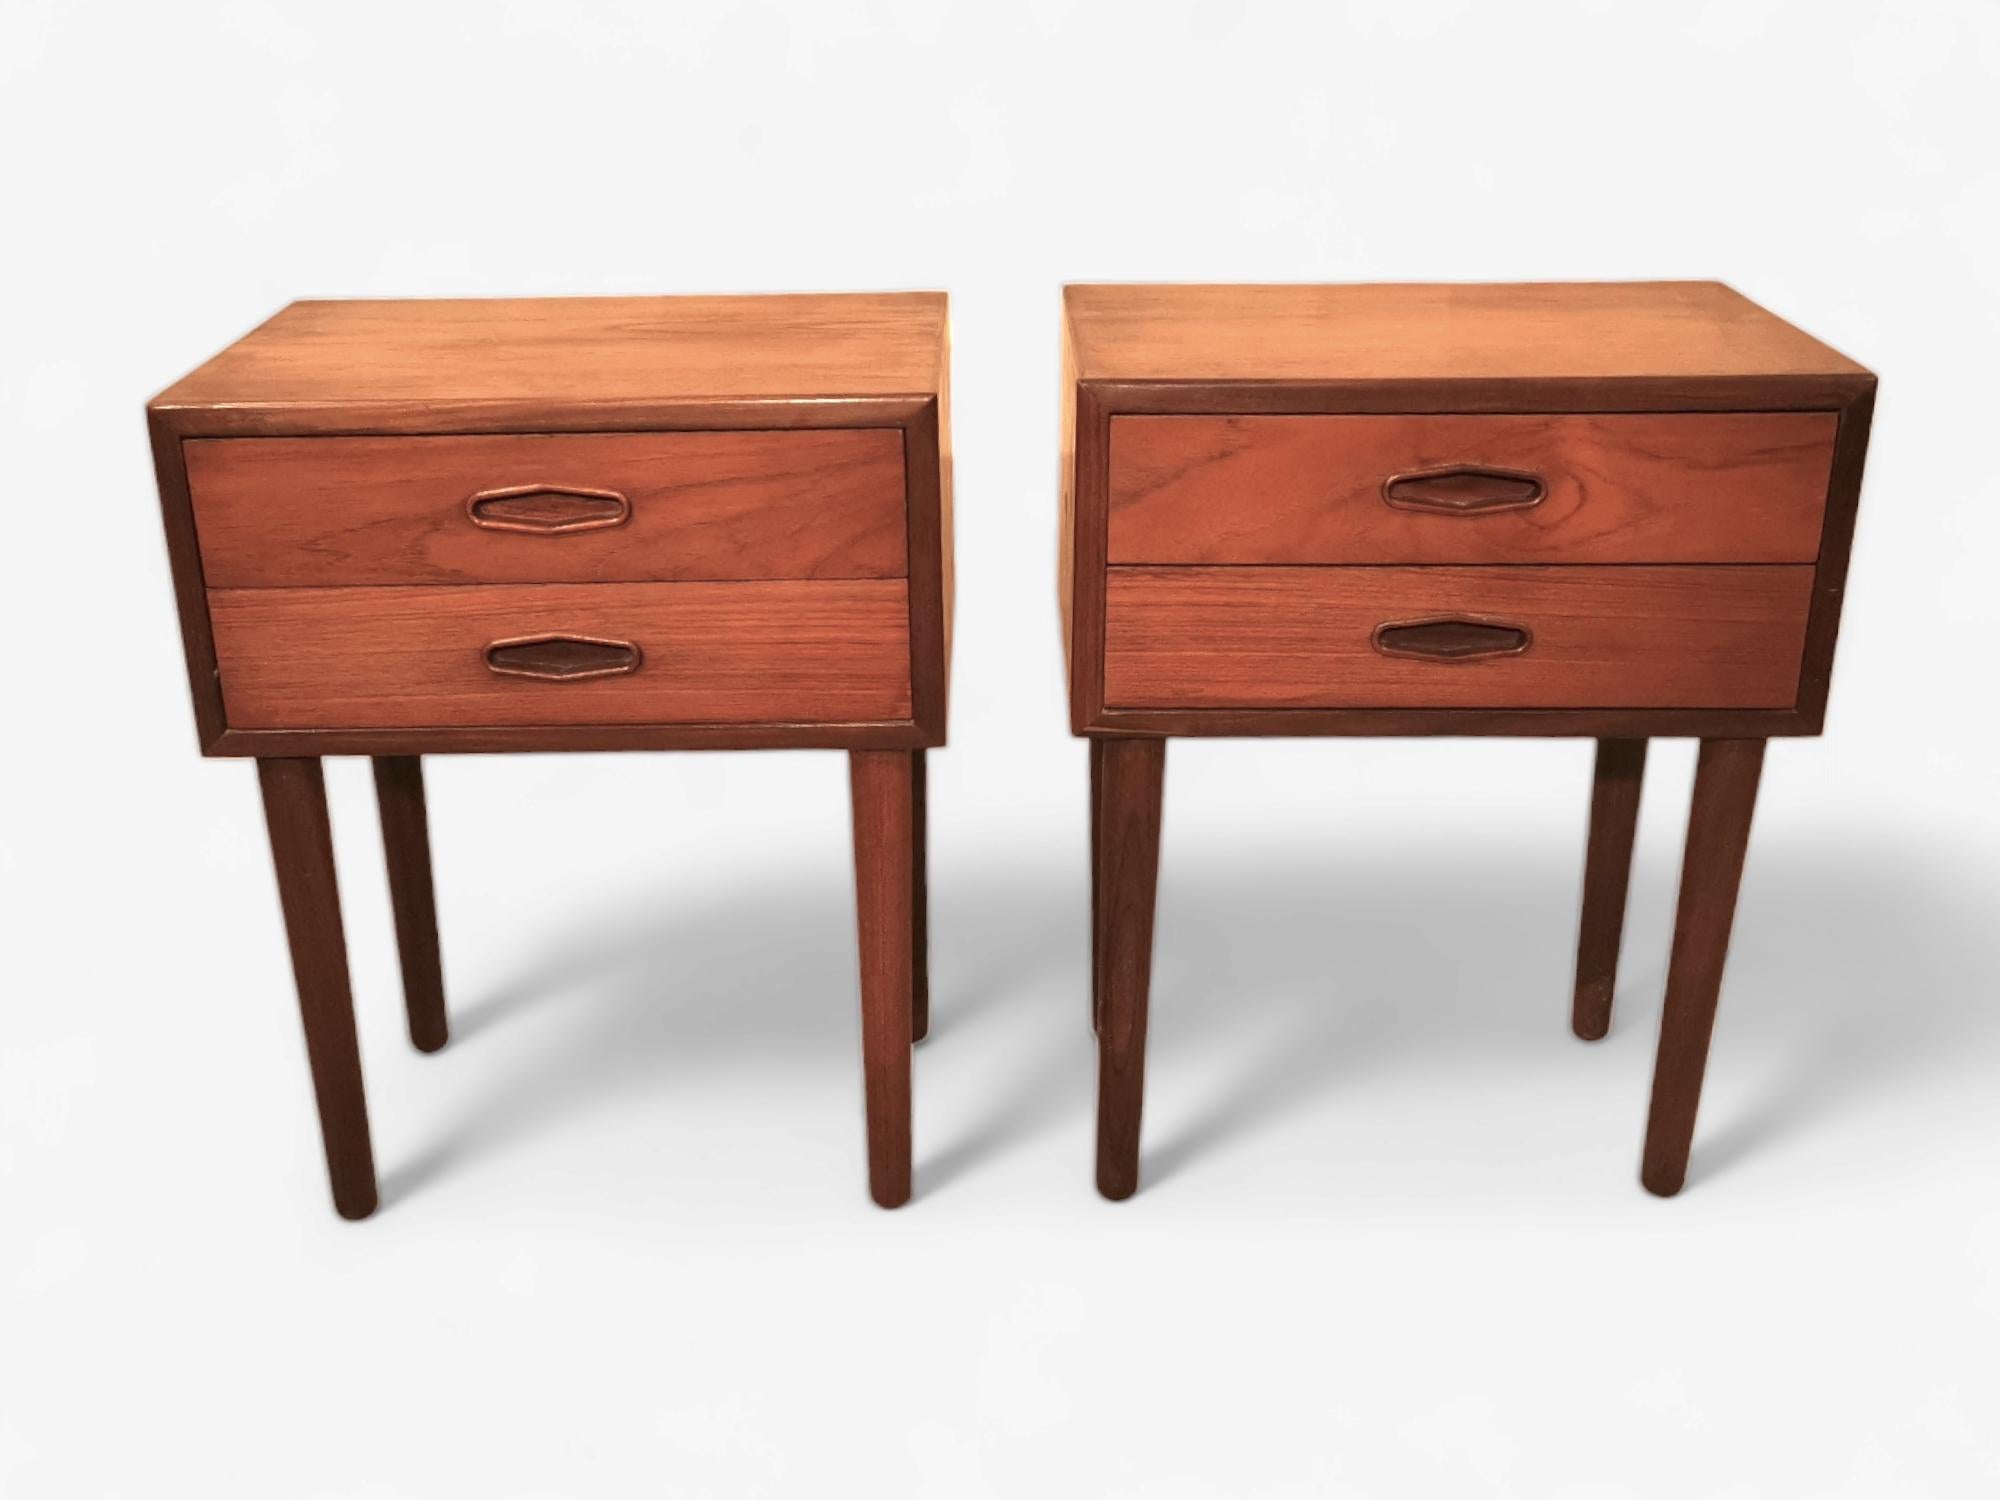 Classic Danish Nightstands From the 60s, With two spacious drawers in each nightstand,  so you can store away, and keep your space organized and clutter-free.
These Danish bedside tables is characterized by clean lines, minimalistic aesthetics, and